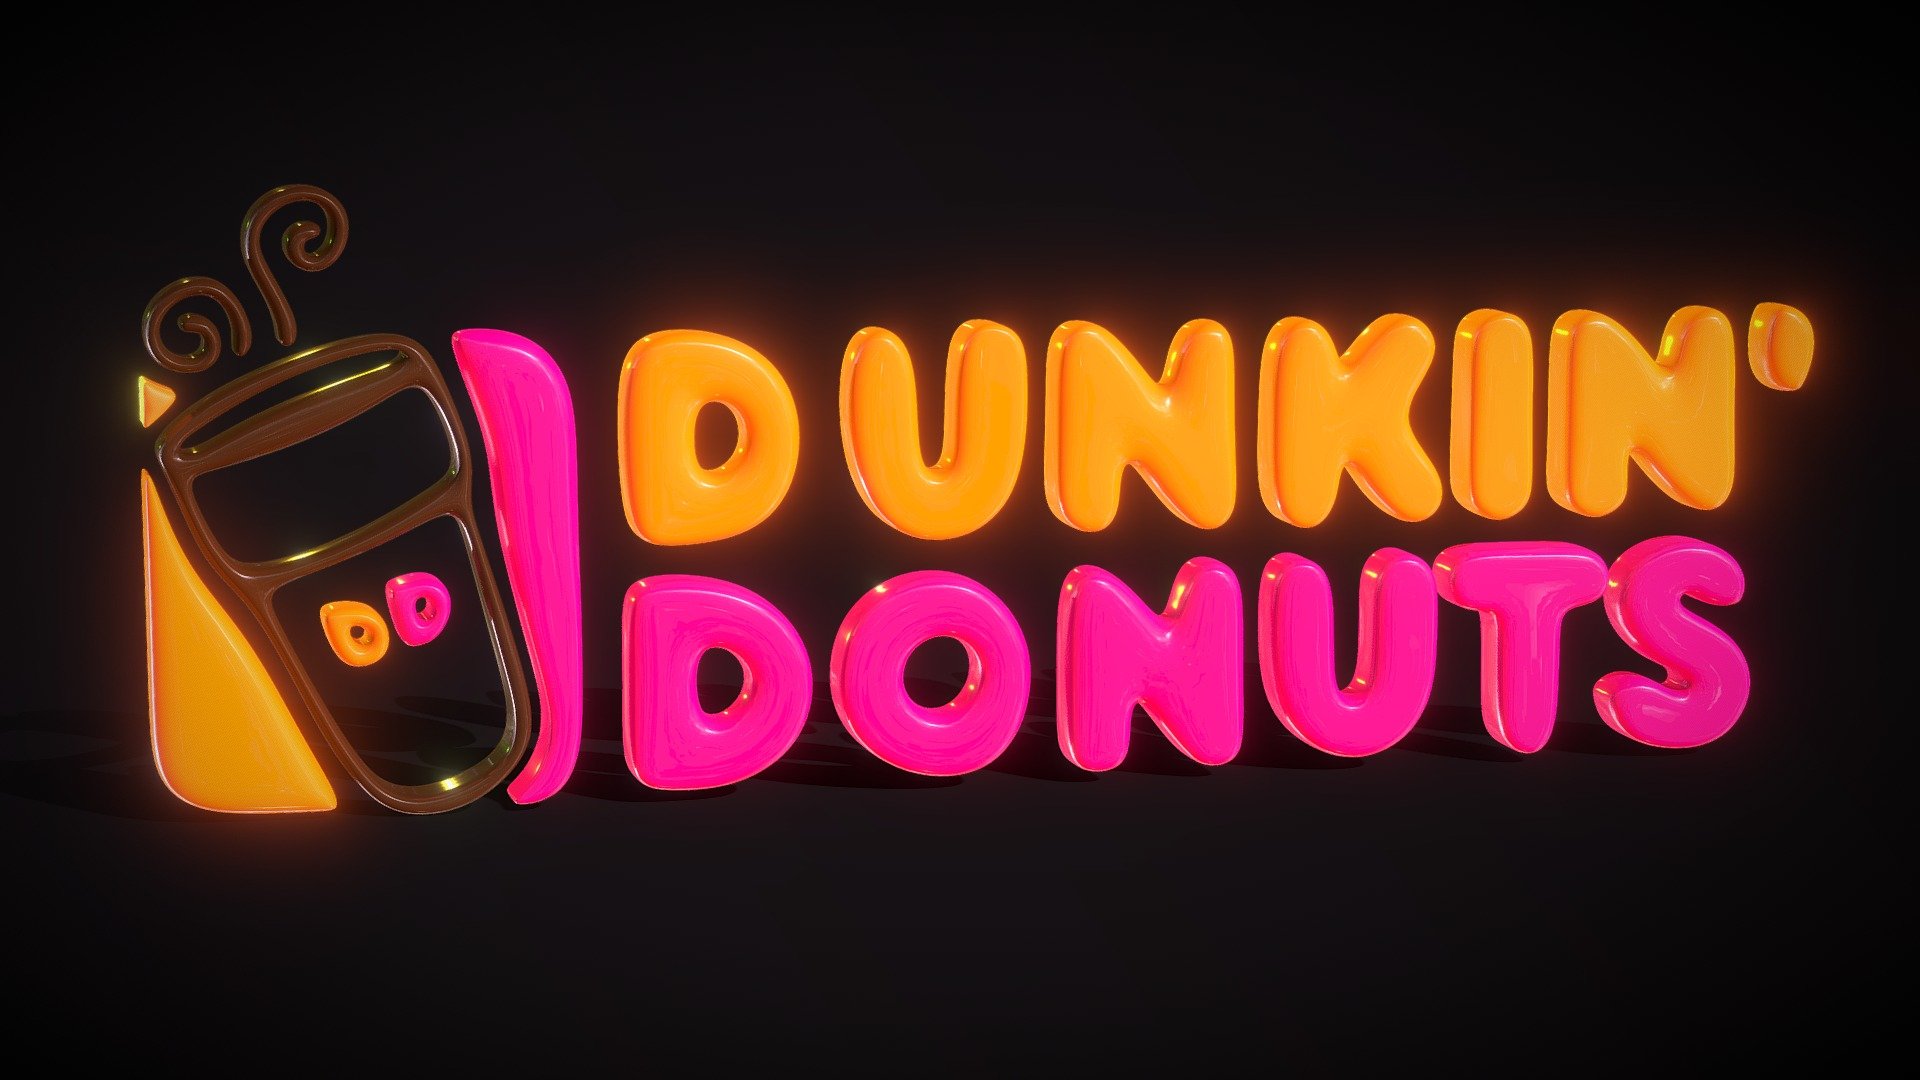 Dunkin' Donuts is a well-known and beloved brand specializing in coffee, baked goods, and breakfast items. Founded in 1950 in the United States, it has grown into one of the world's largest coffee and baked goods chains. With its distinctive pink and orange logo, Dunkin' Donuts has become an iconic presence in the global food and beverage industry 3d model